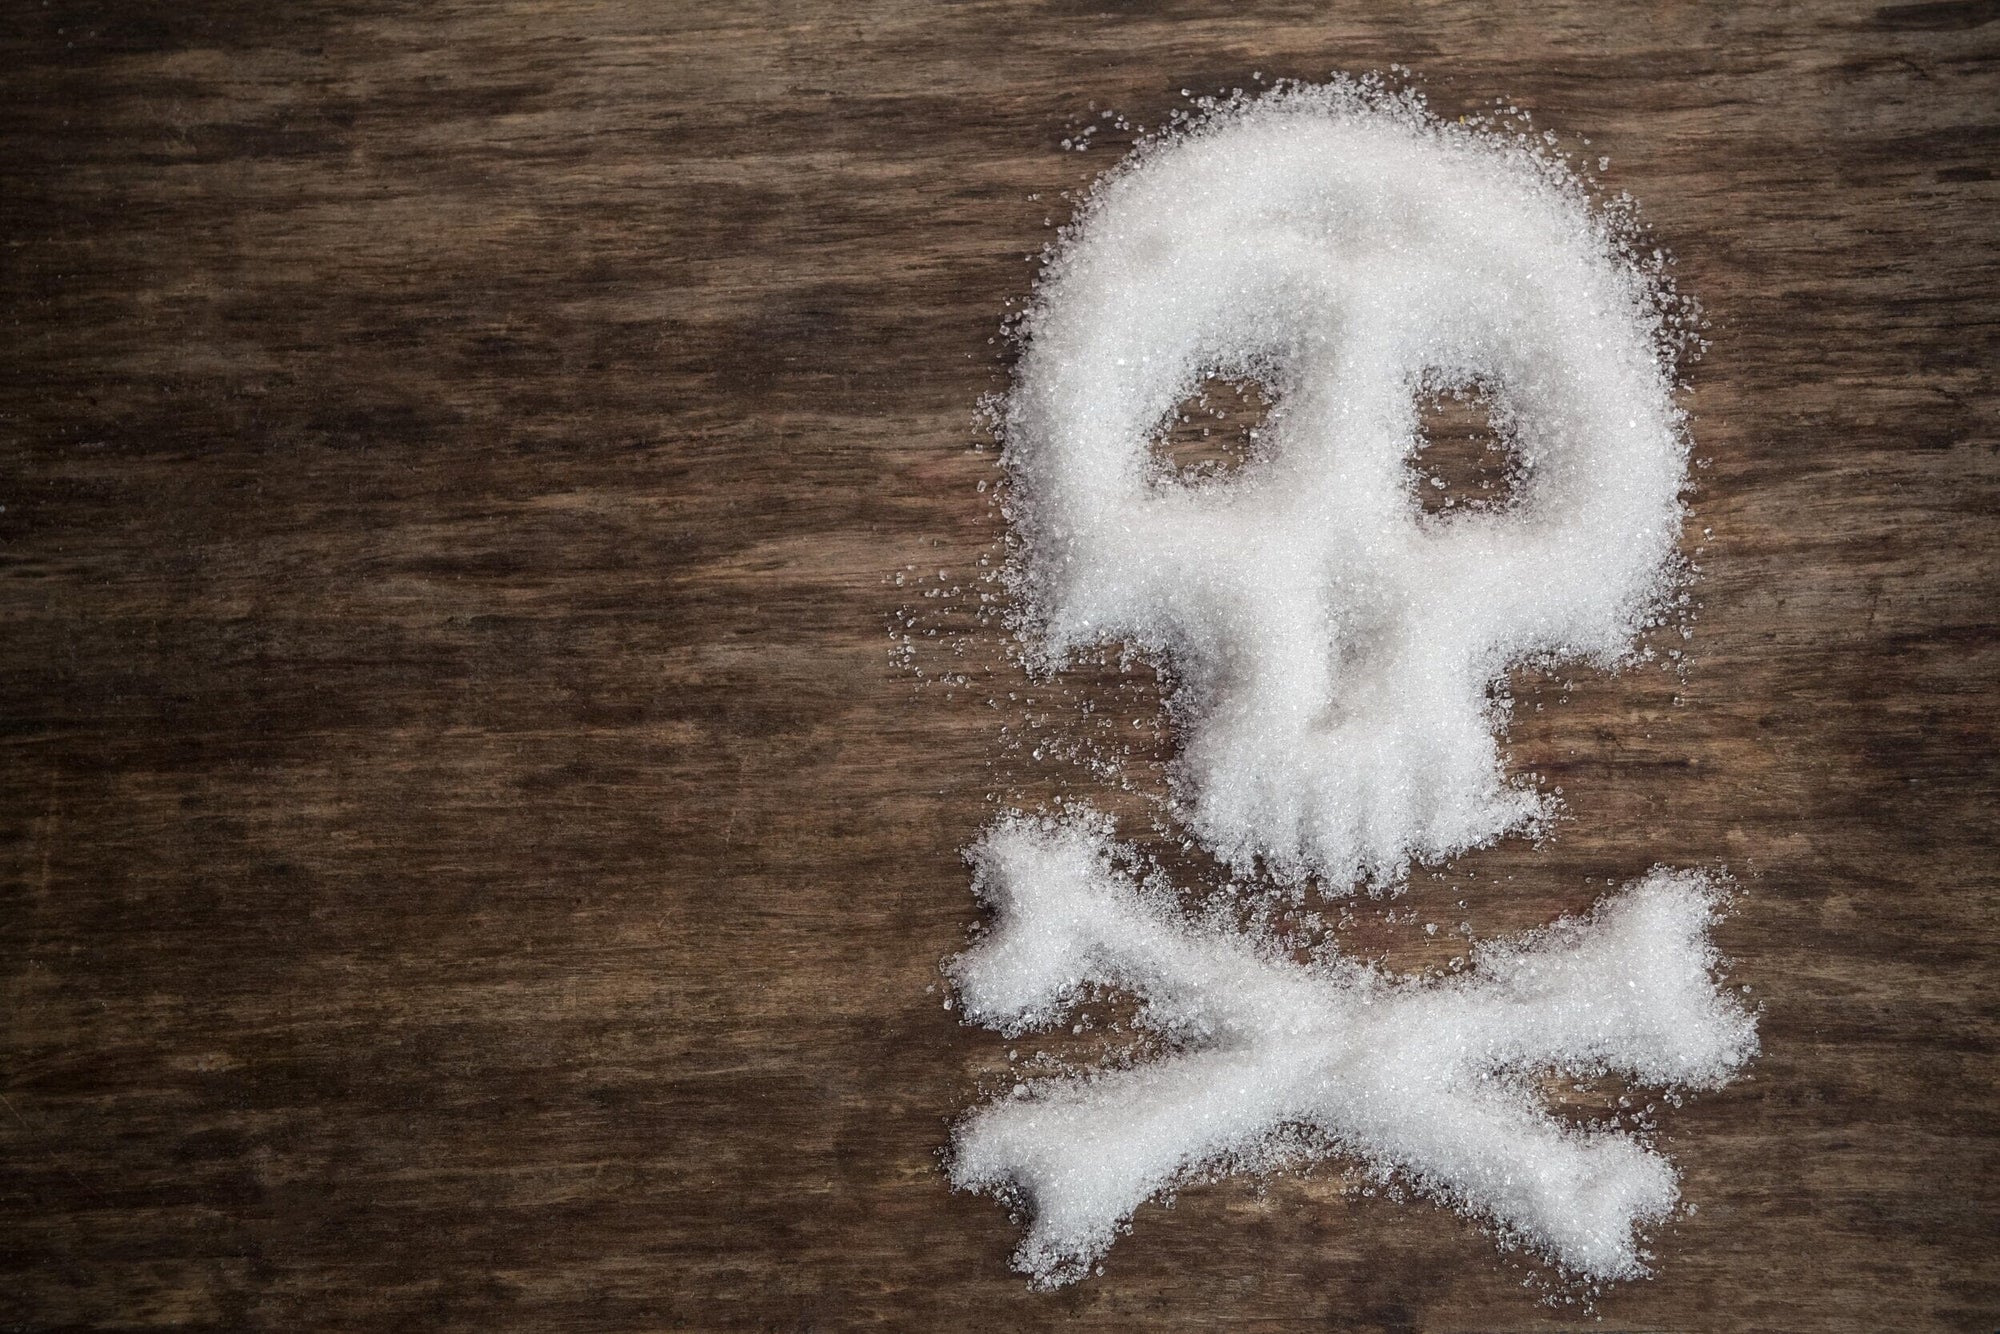 Why is Sugar Bad For You?